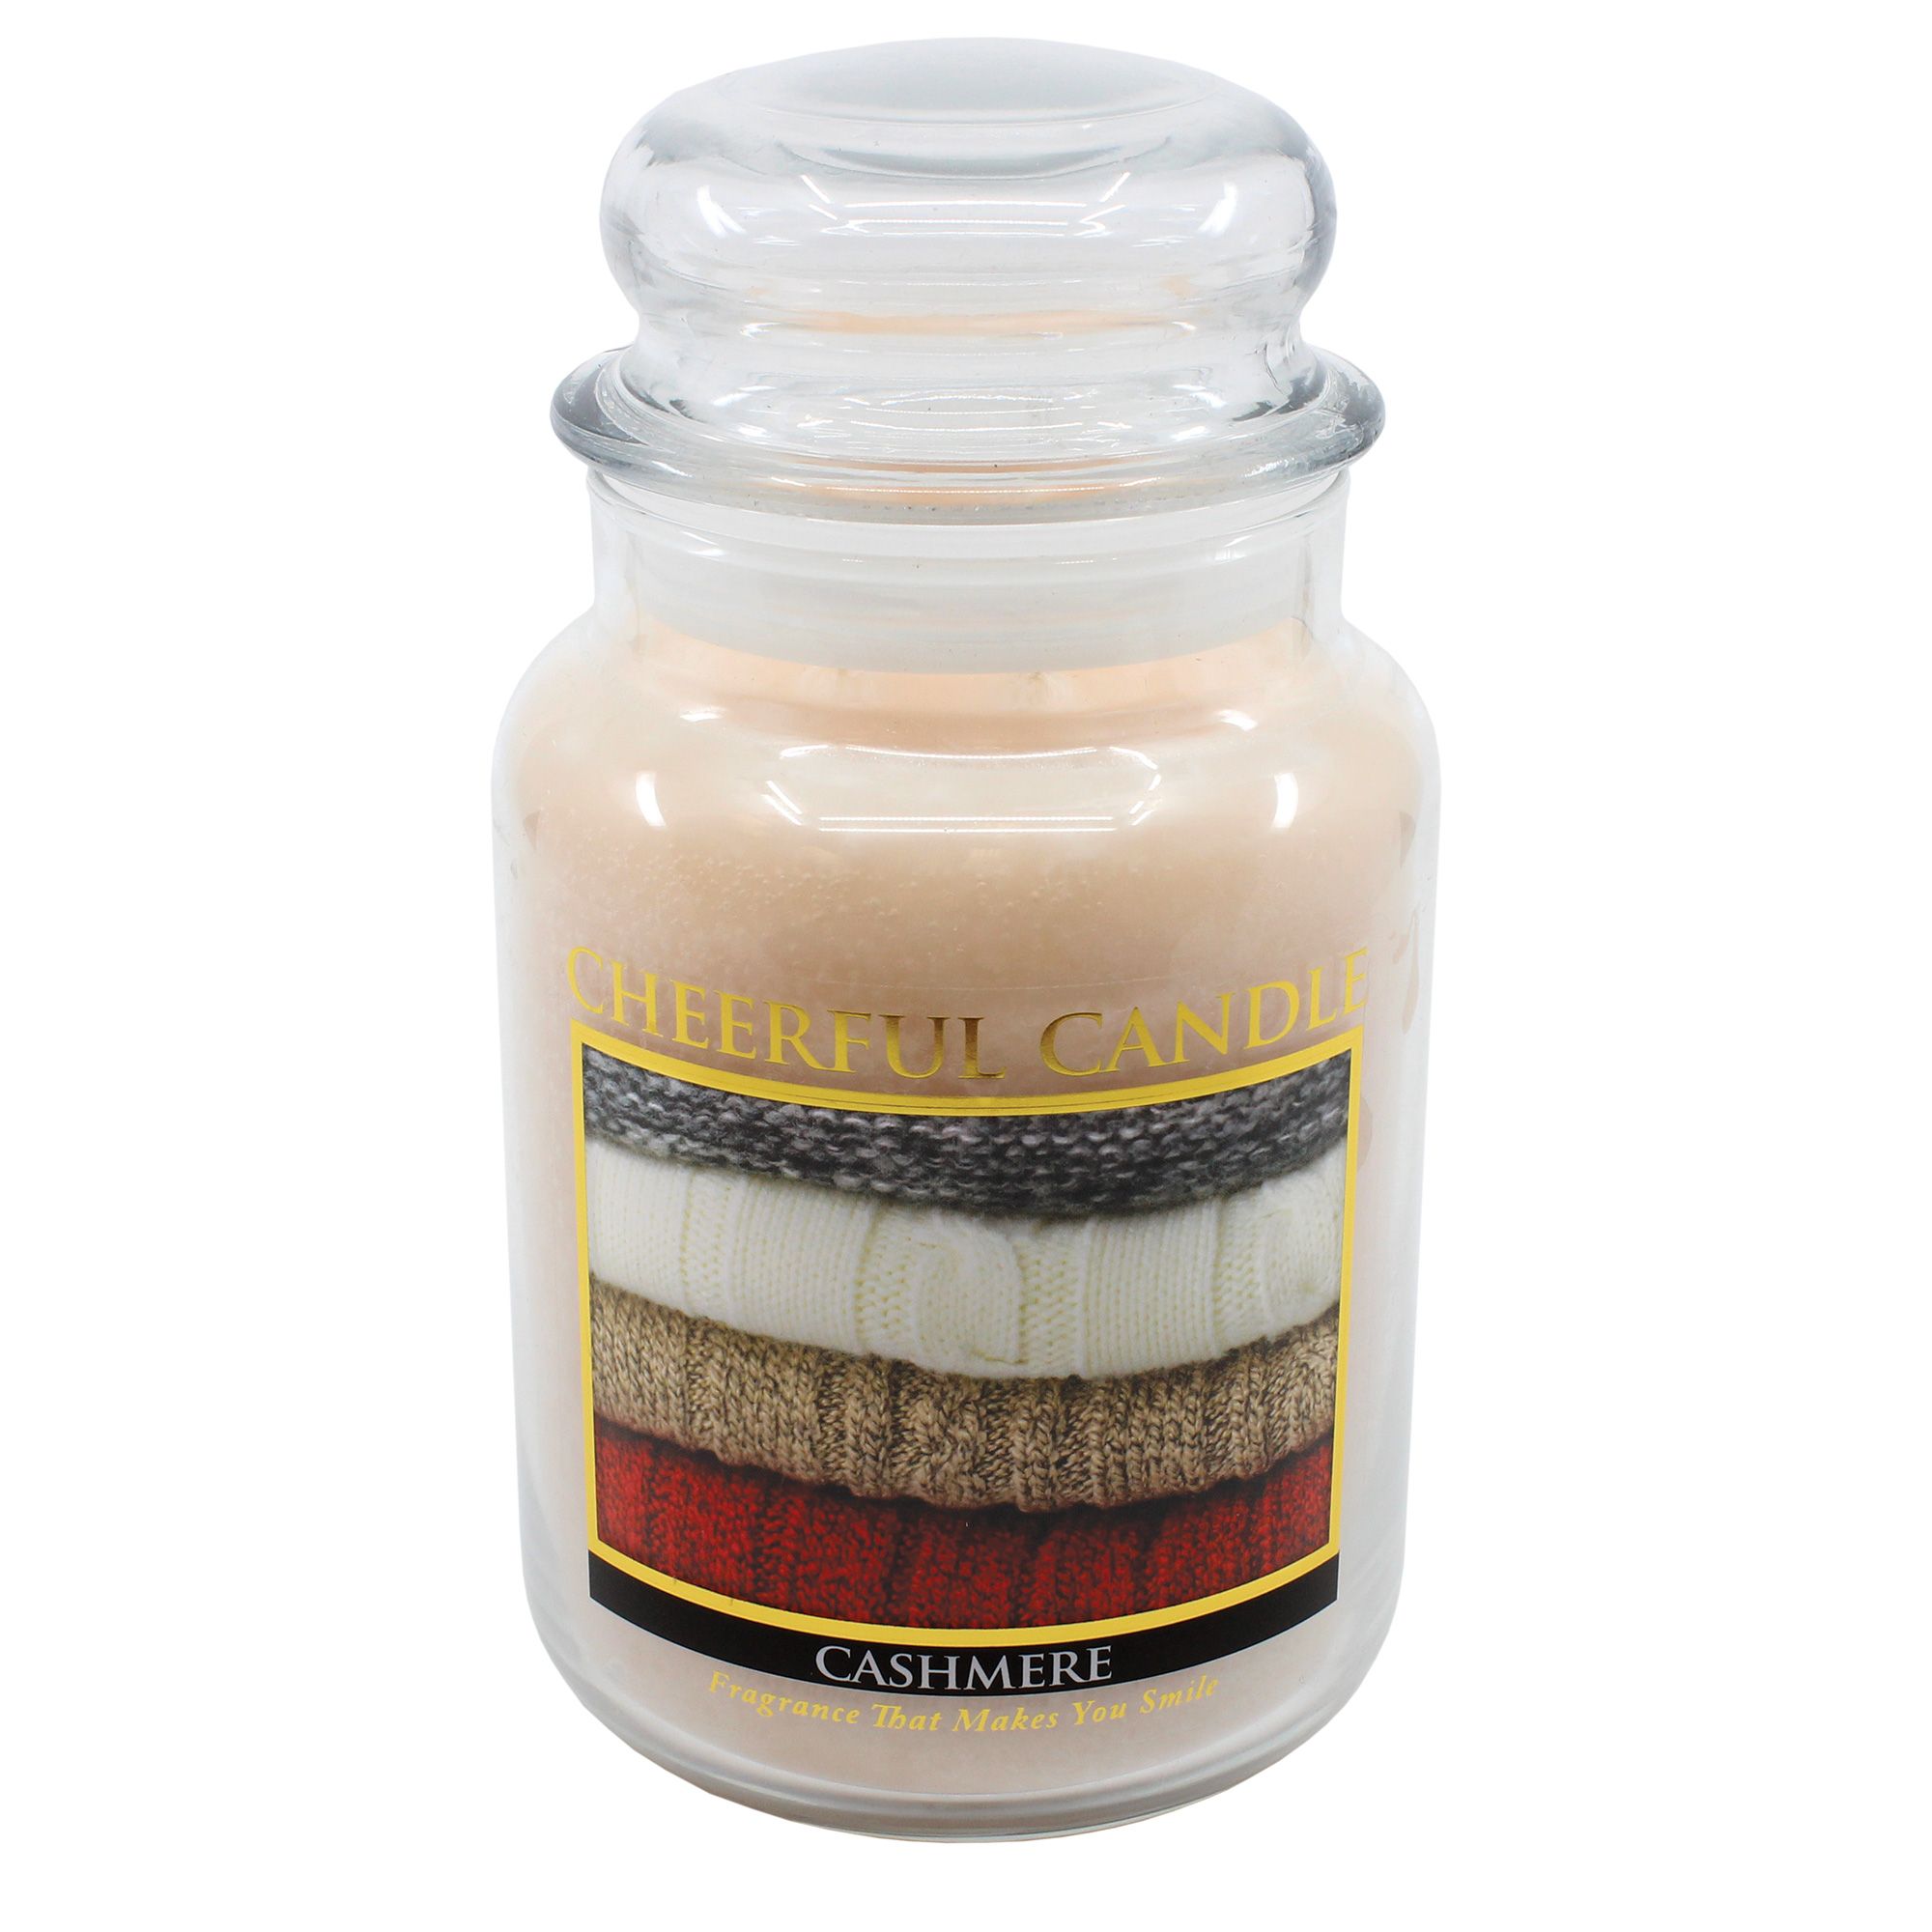 CASHMERE  Large - Cheerful Candle